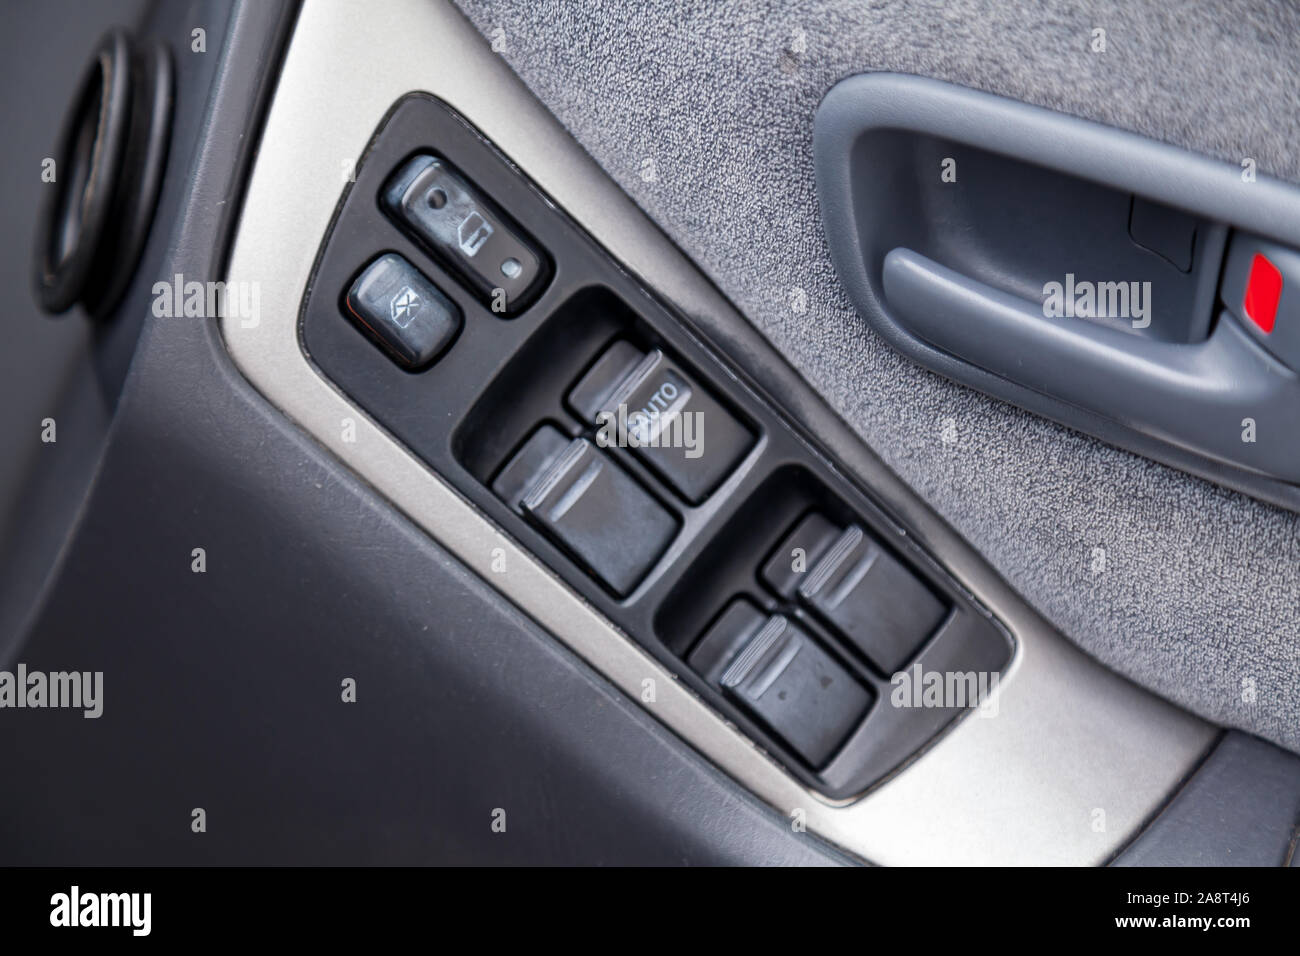 Novosibirsk, Russia - 11.05.2019: View to the gray interior of Toyota Harrier or Lexus RX300 with dashboard, door panel with window anв lock adjust bu Stock Photo